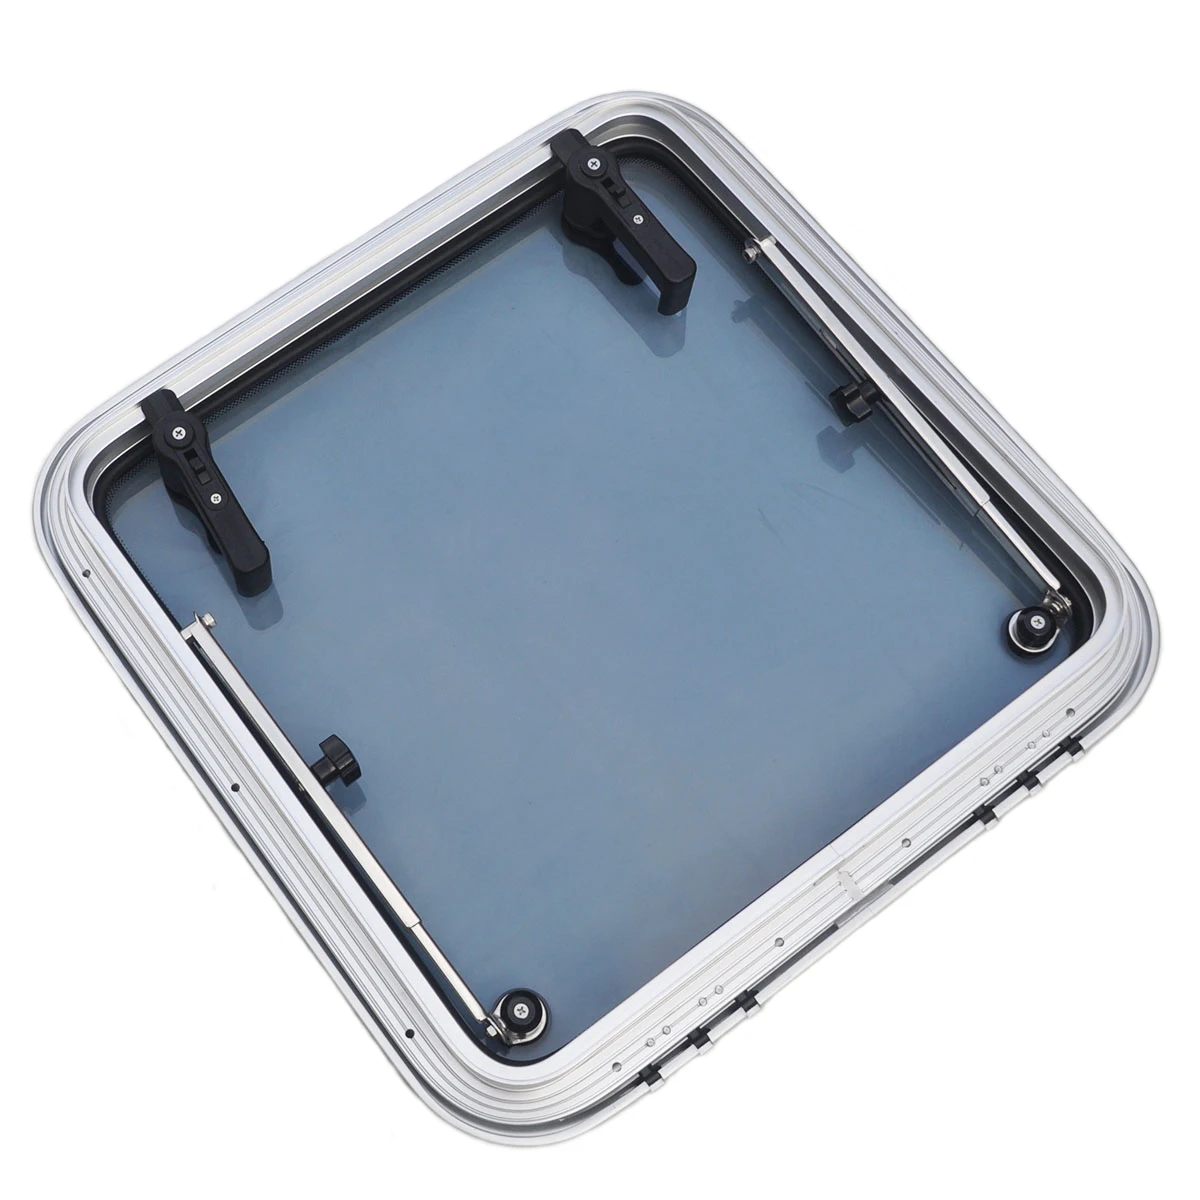 Small-Sized Marine Anodized Aluminum Square Hatch Porthole With Tempered Glass For Marine Boat Window bo 698 automatic smart glass cleaner robot vacuum window vacuum cleaner with round cleaning cloth eu plug